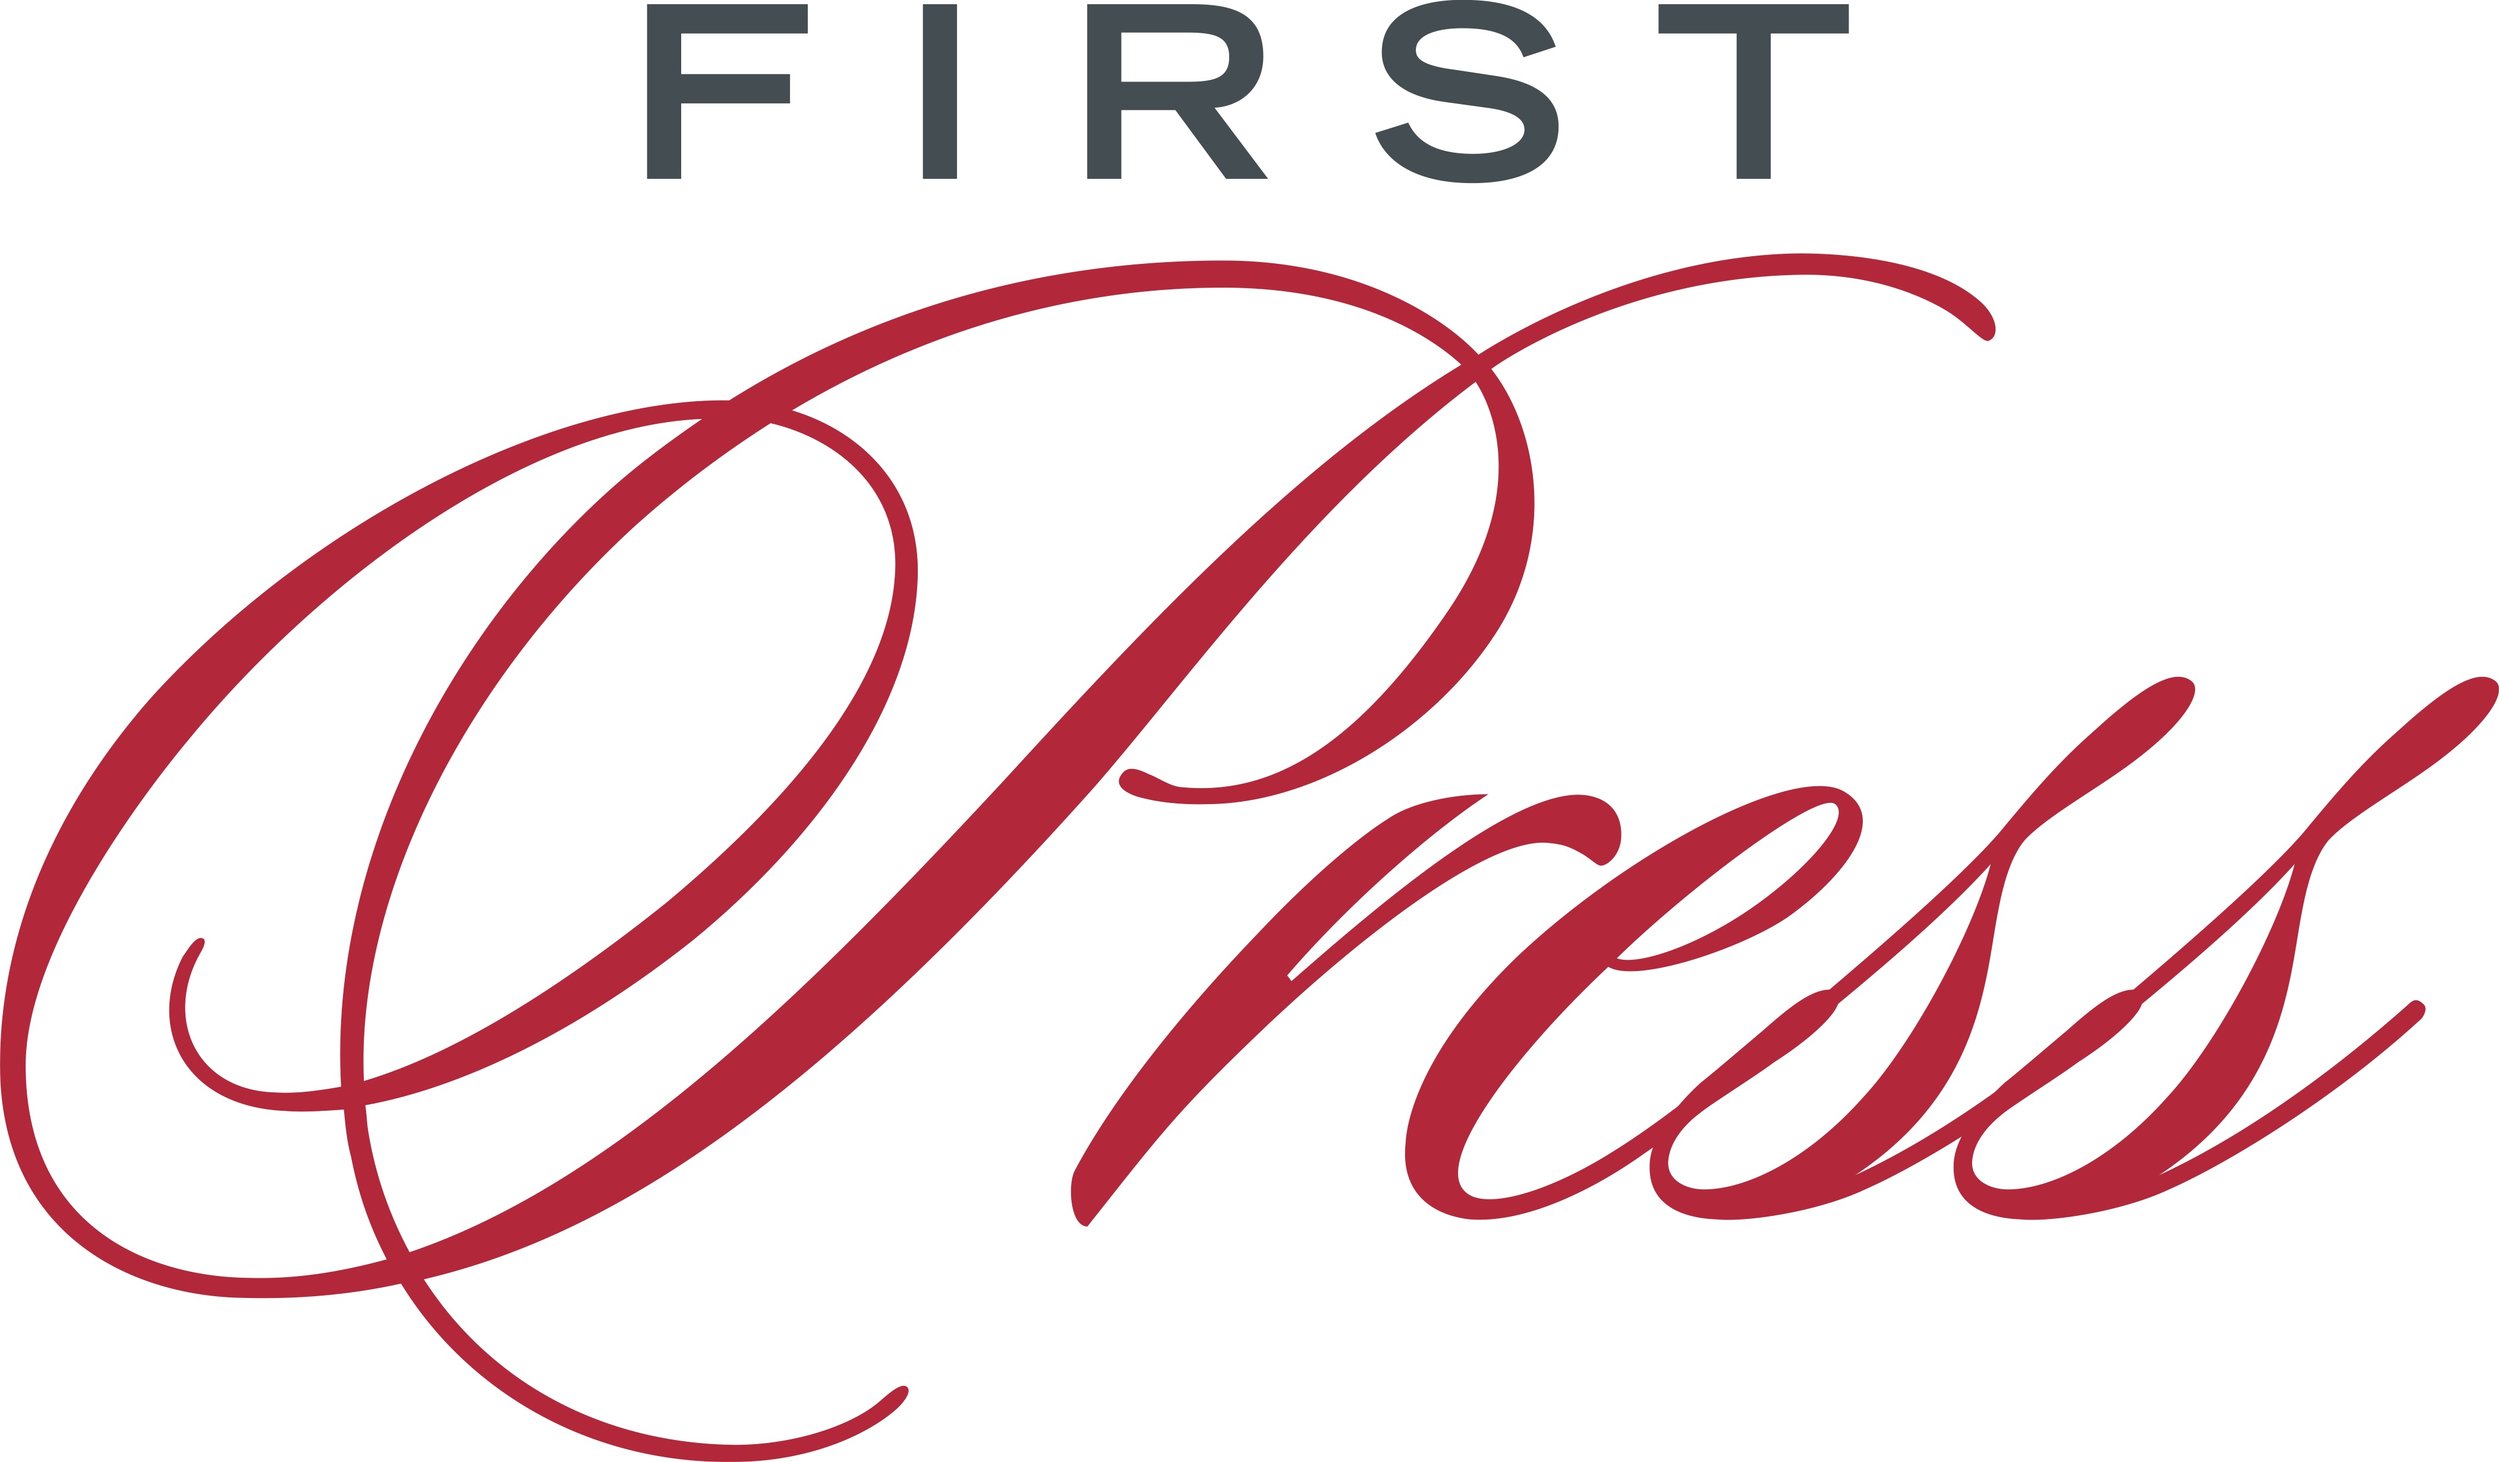 First Press Public Relations